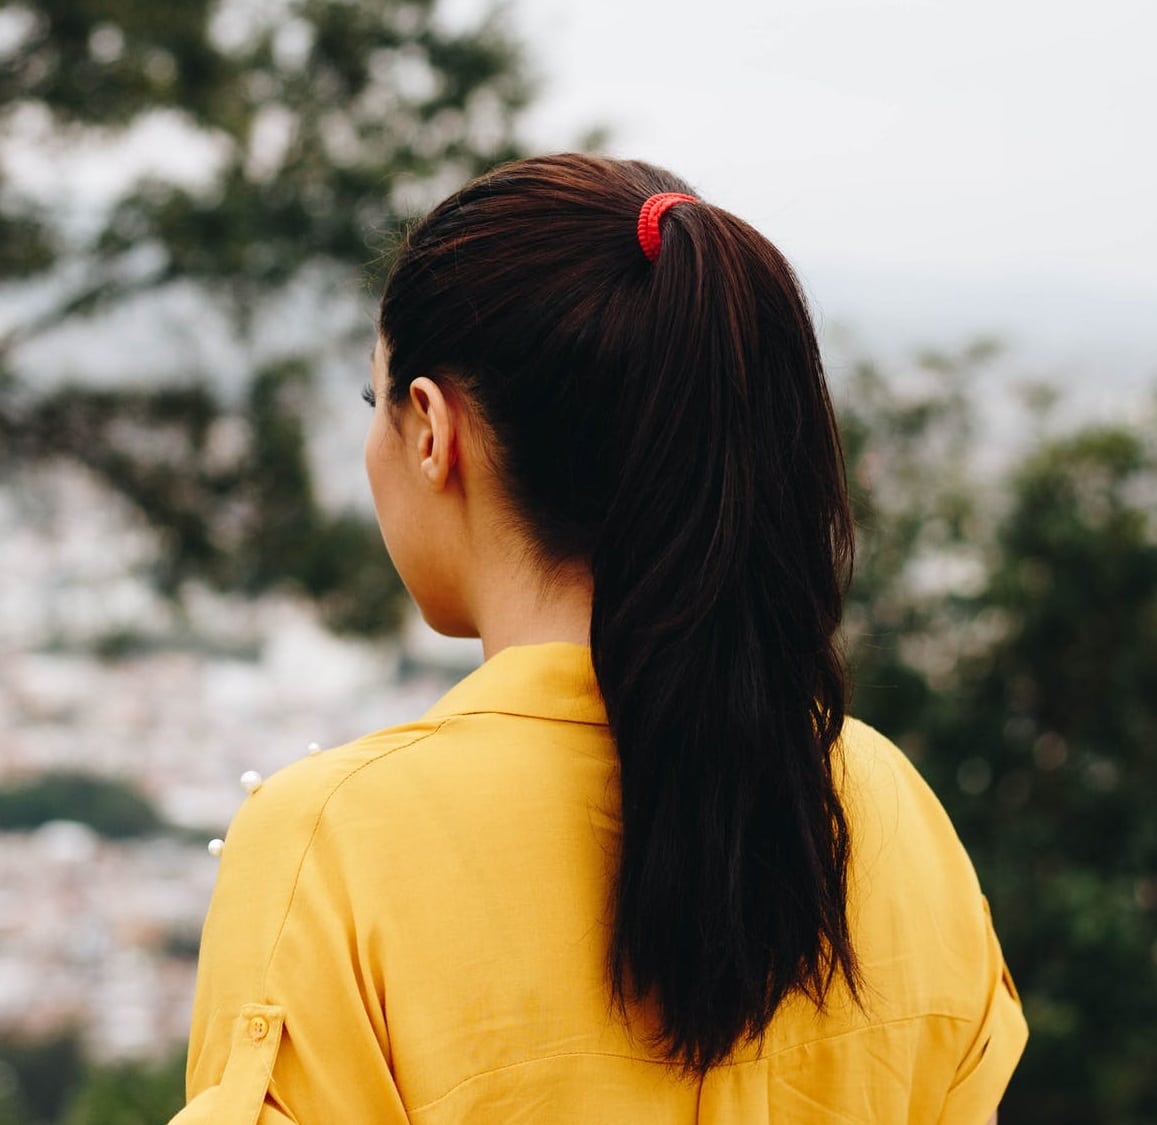 Girl with ponytail hair style wearing yellow dress